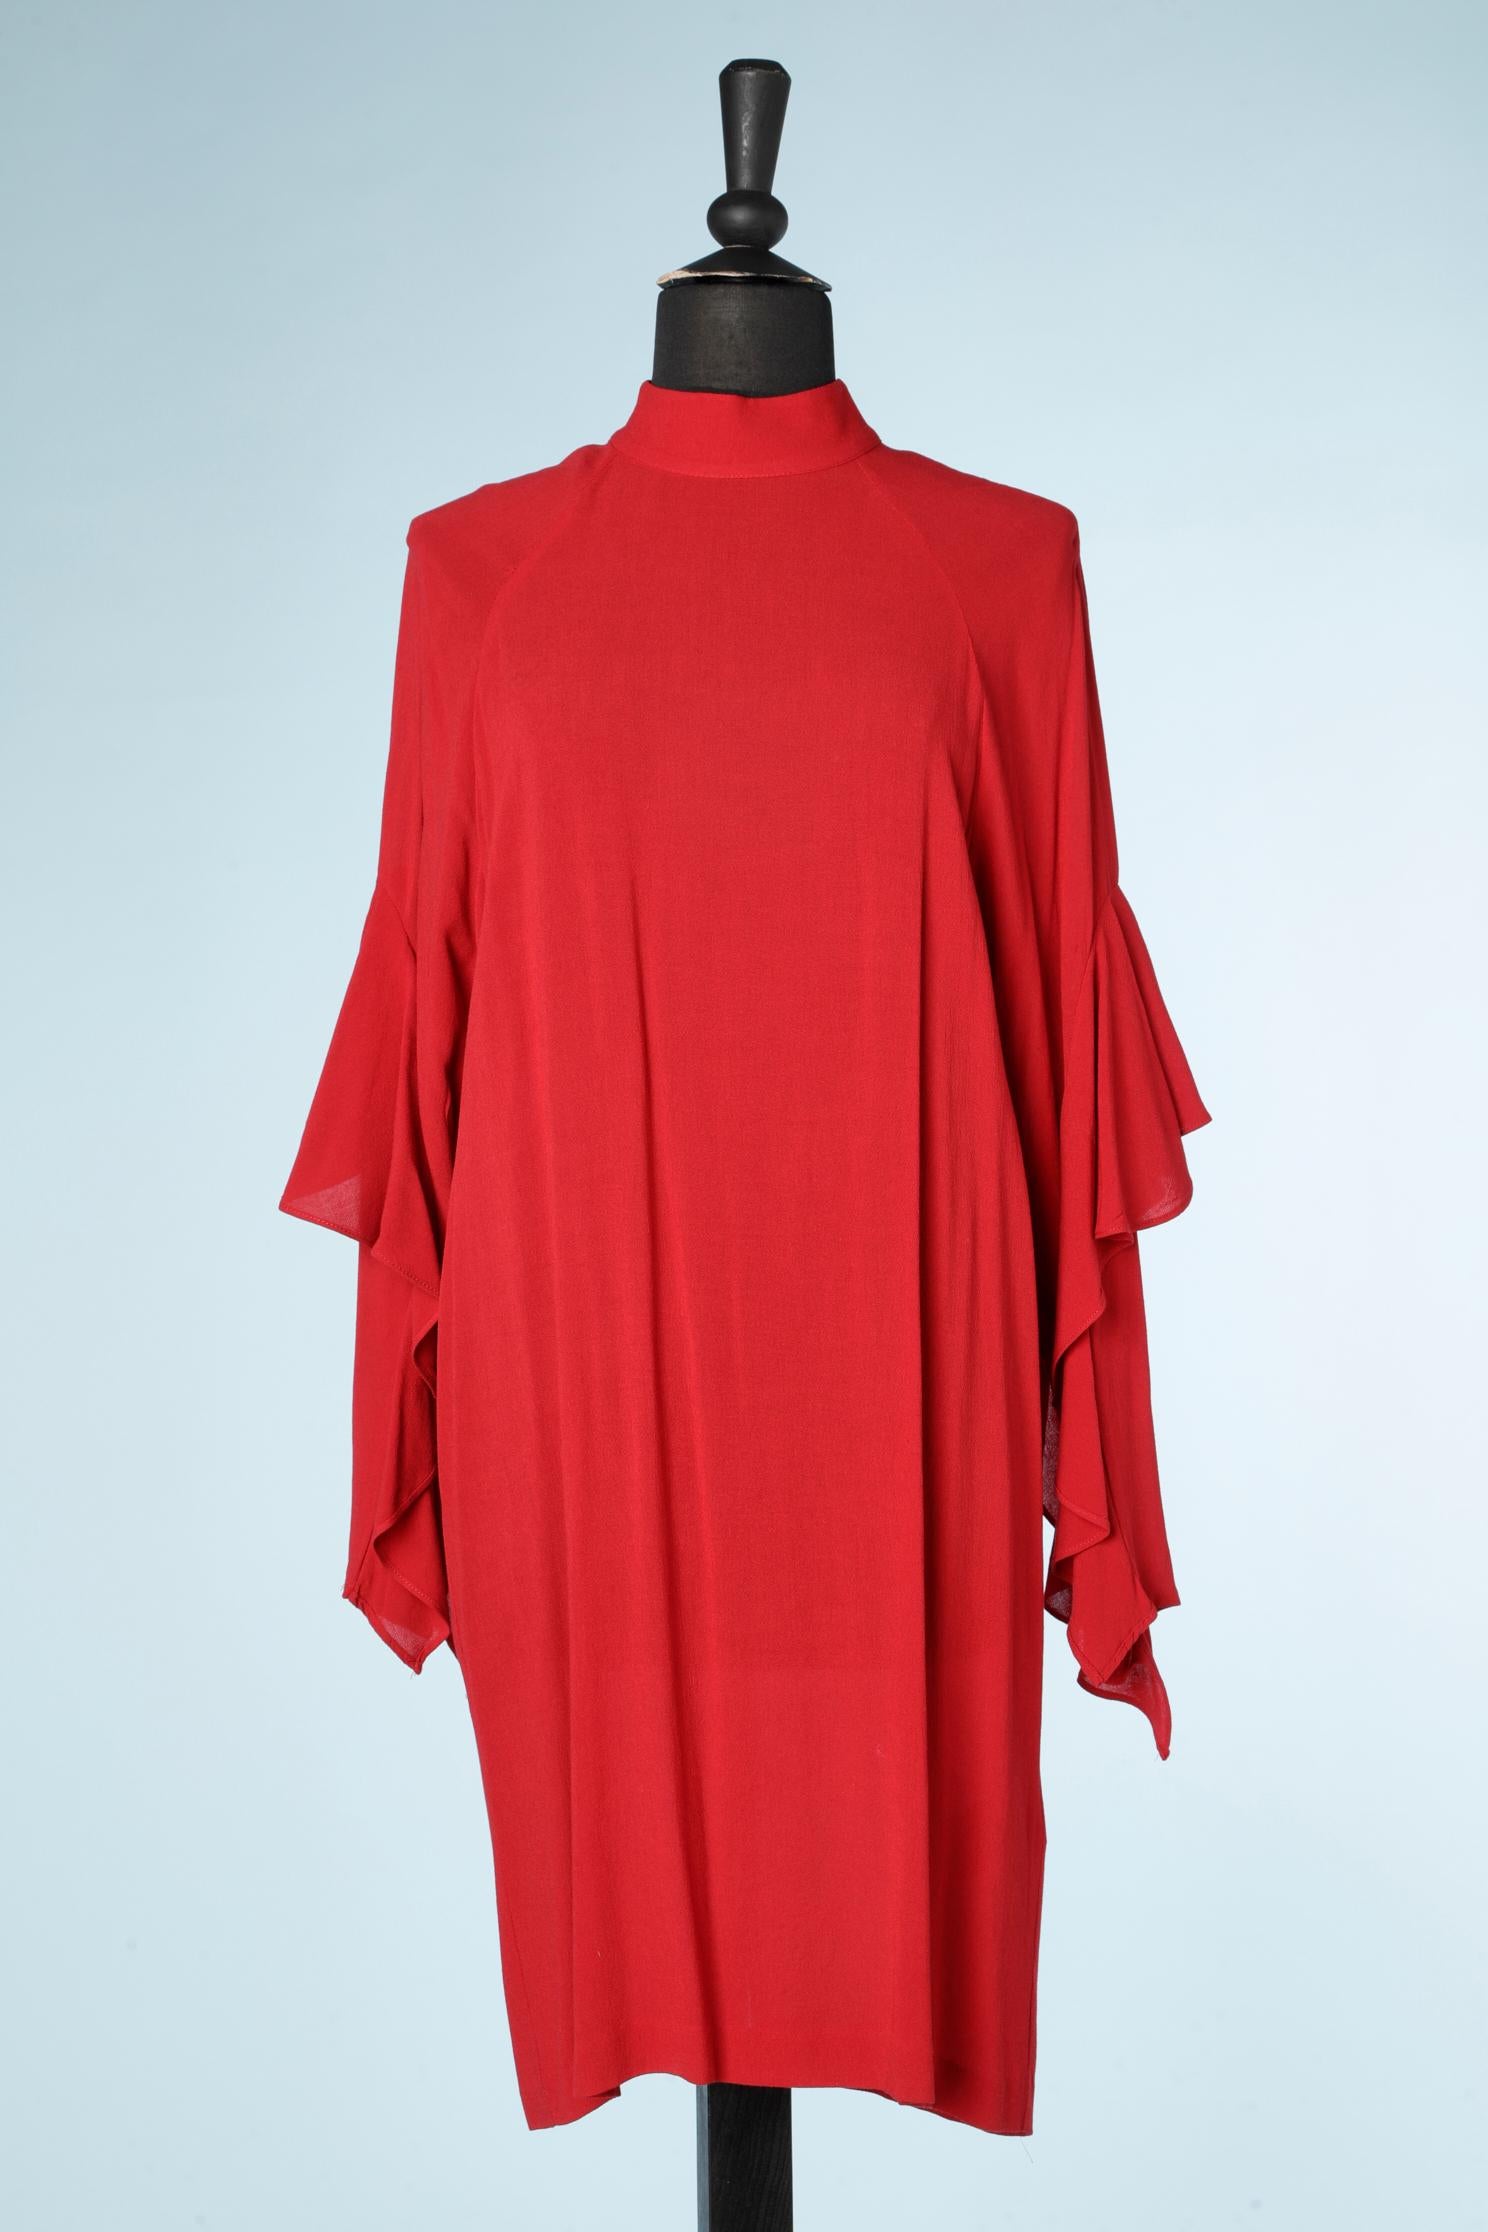 Red rayon cocktail dress with ruffles on the sleeves and raglan sleeves.
Button in the top middle back and buttonhole. One extra button provided. 
SIZE L 